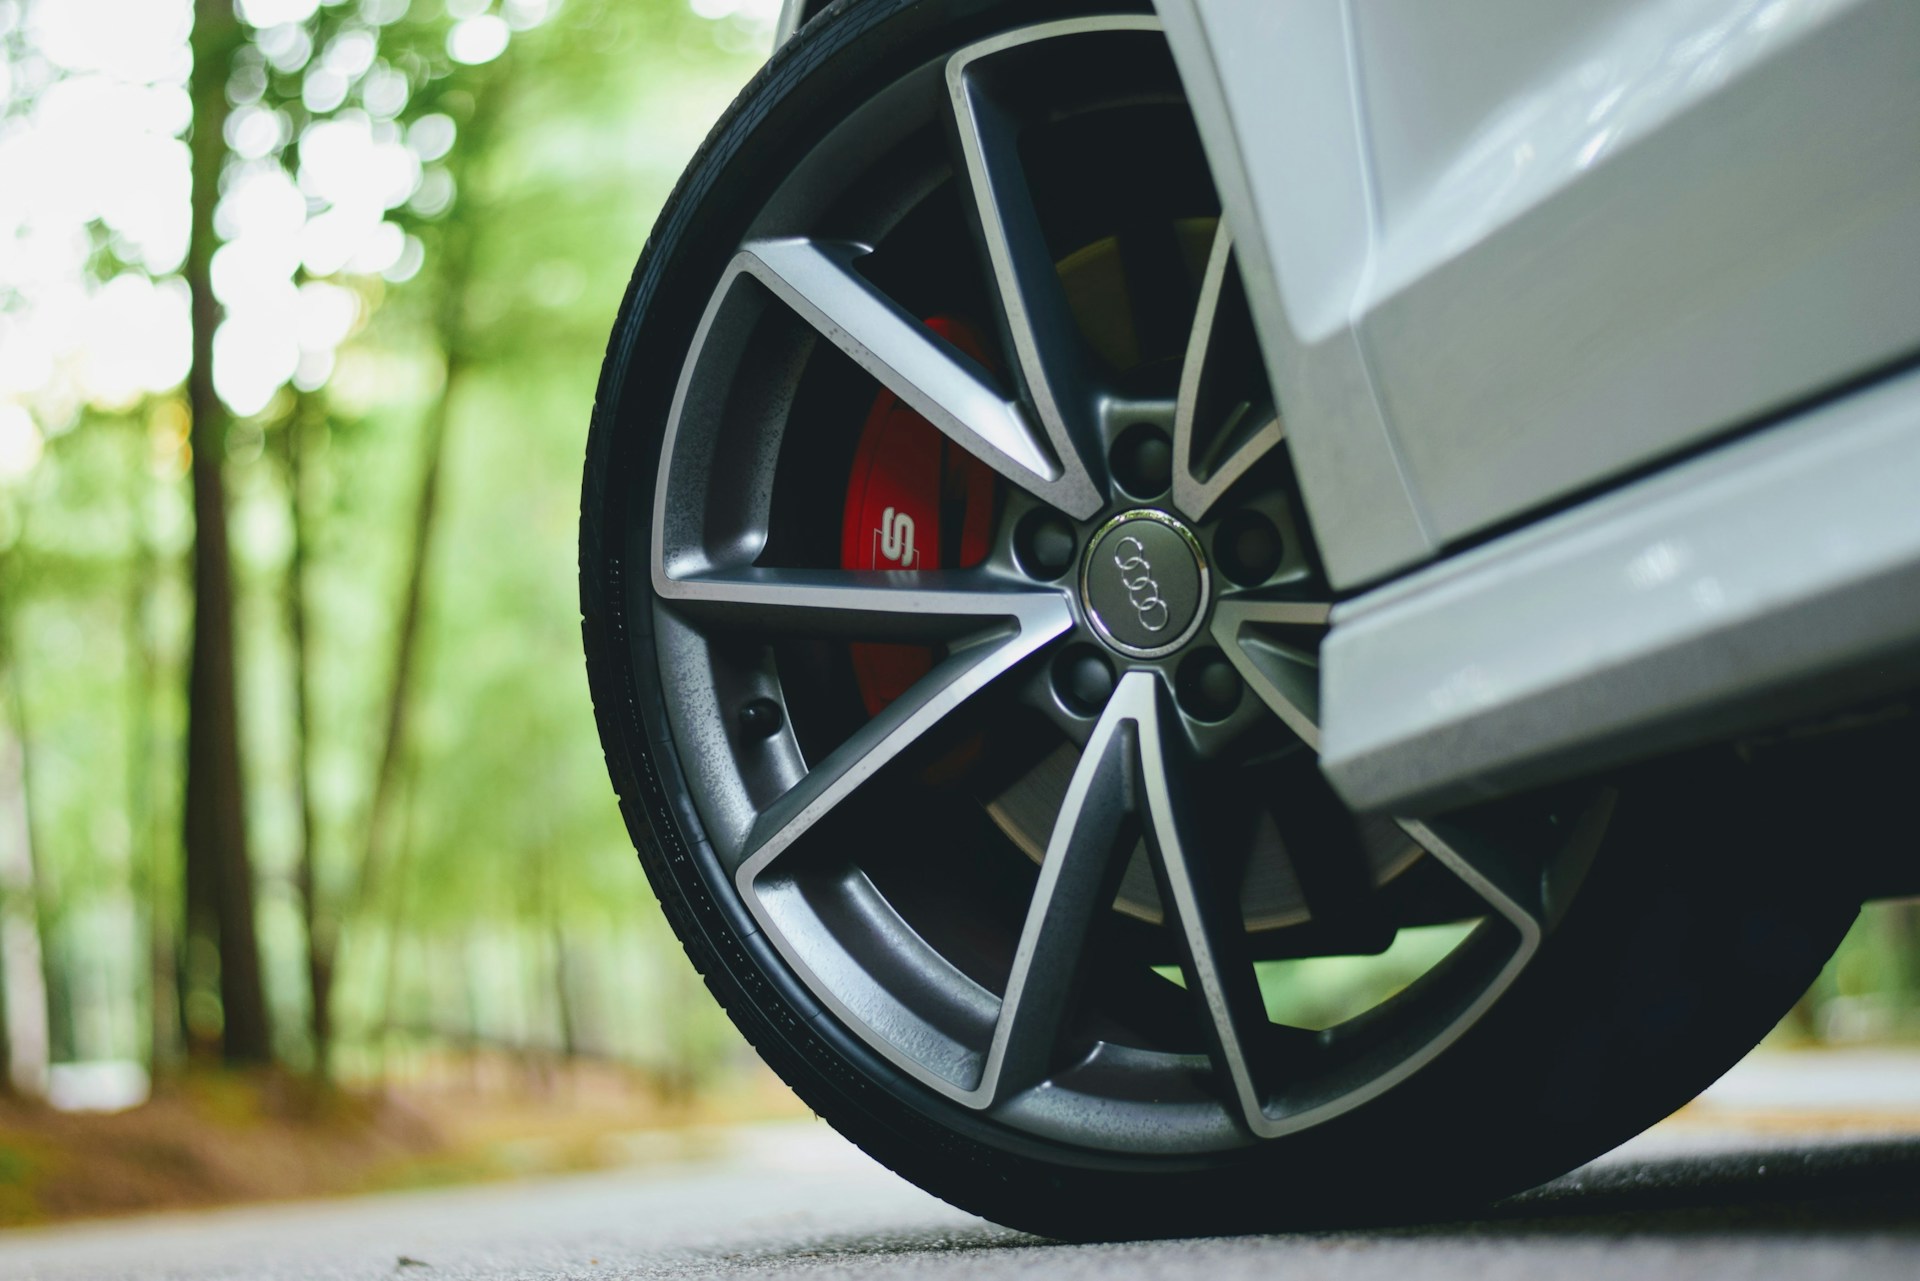 Cool Accessories for Your Wheels You Never Knew You Needed